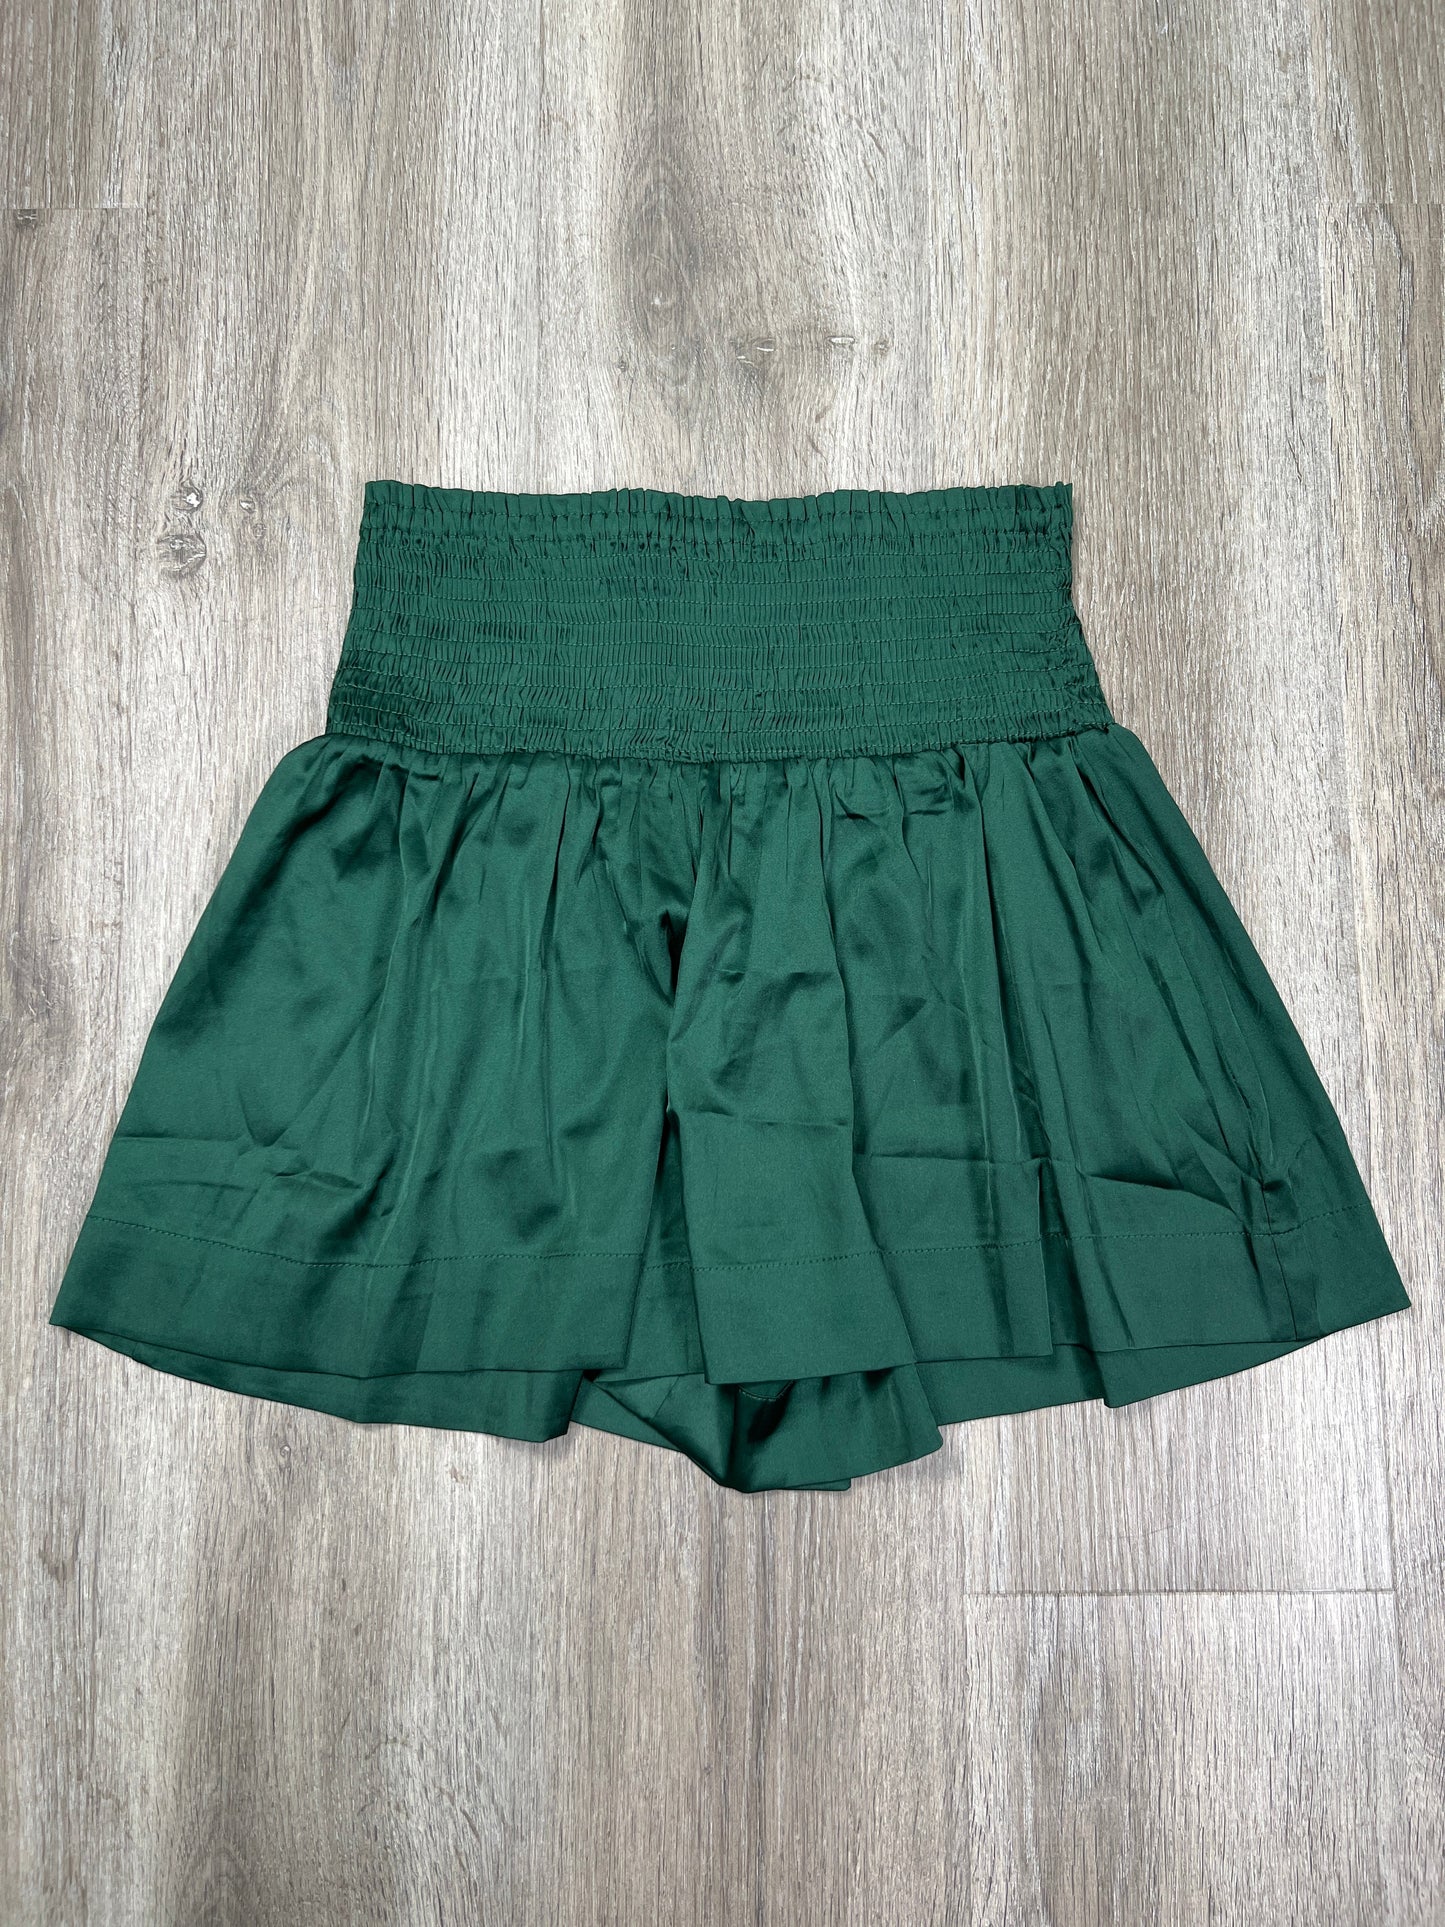 Green Shorts Tcec, Size S